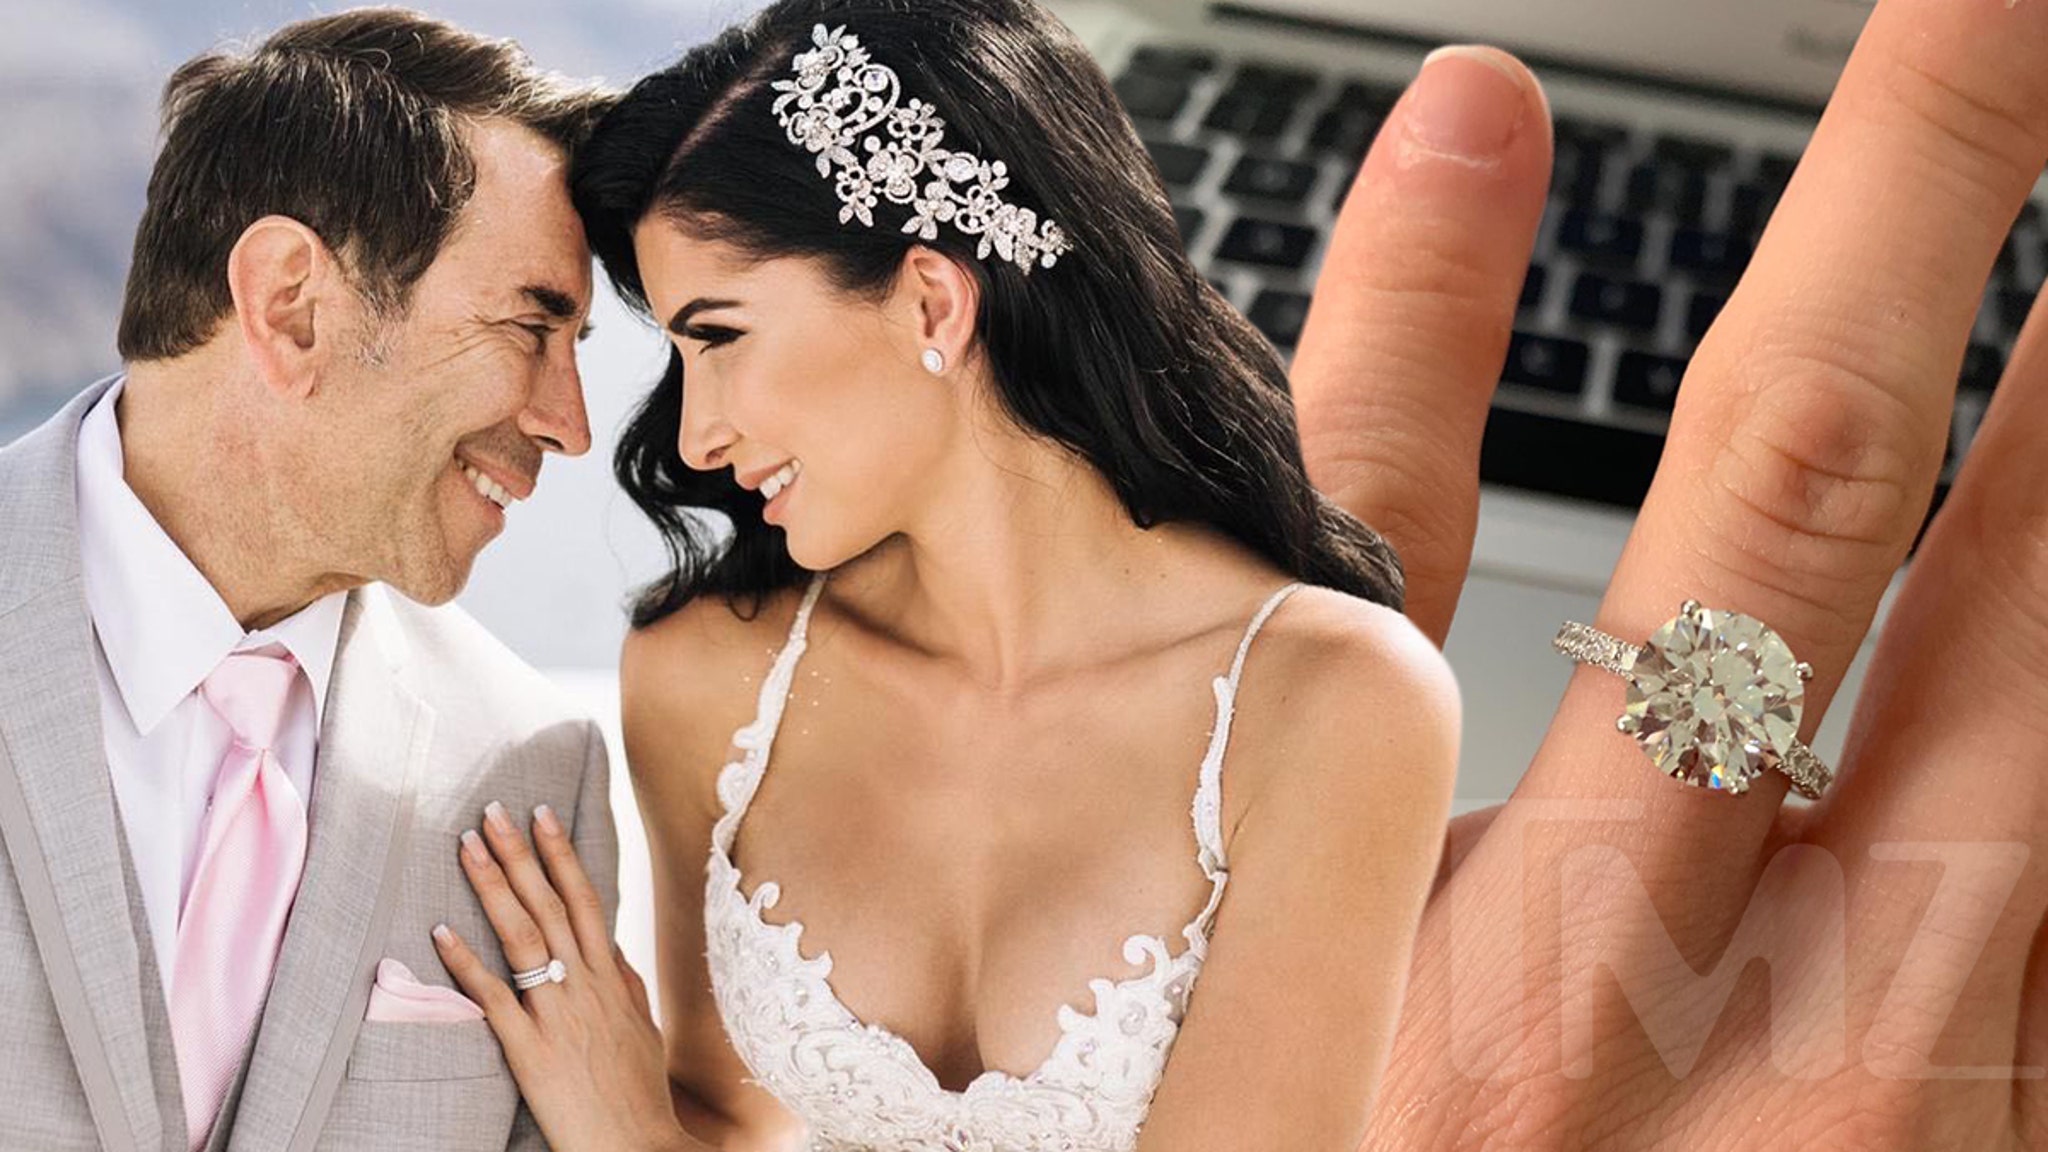 Botched' Star Dr. Paul Nassif Drops $174k for Engagement, Wedding Rings